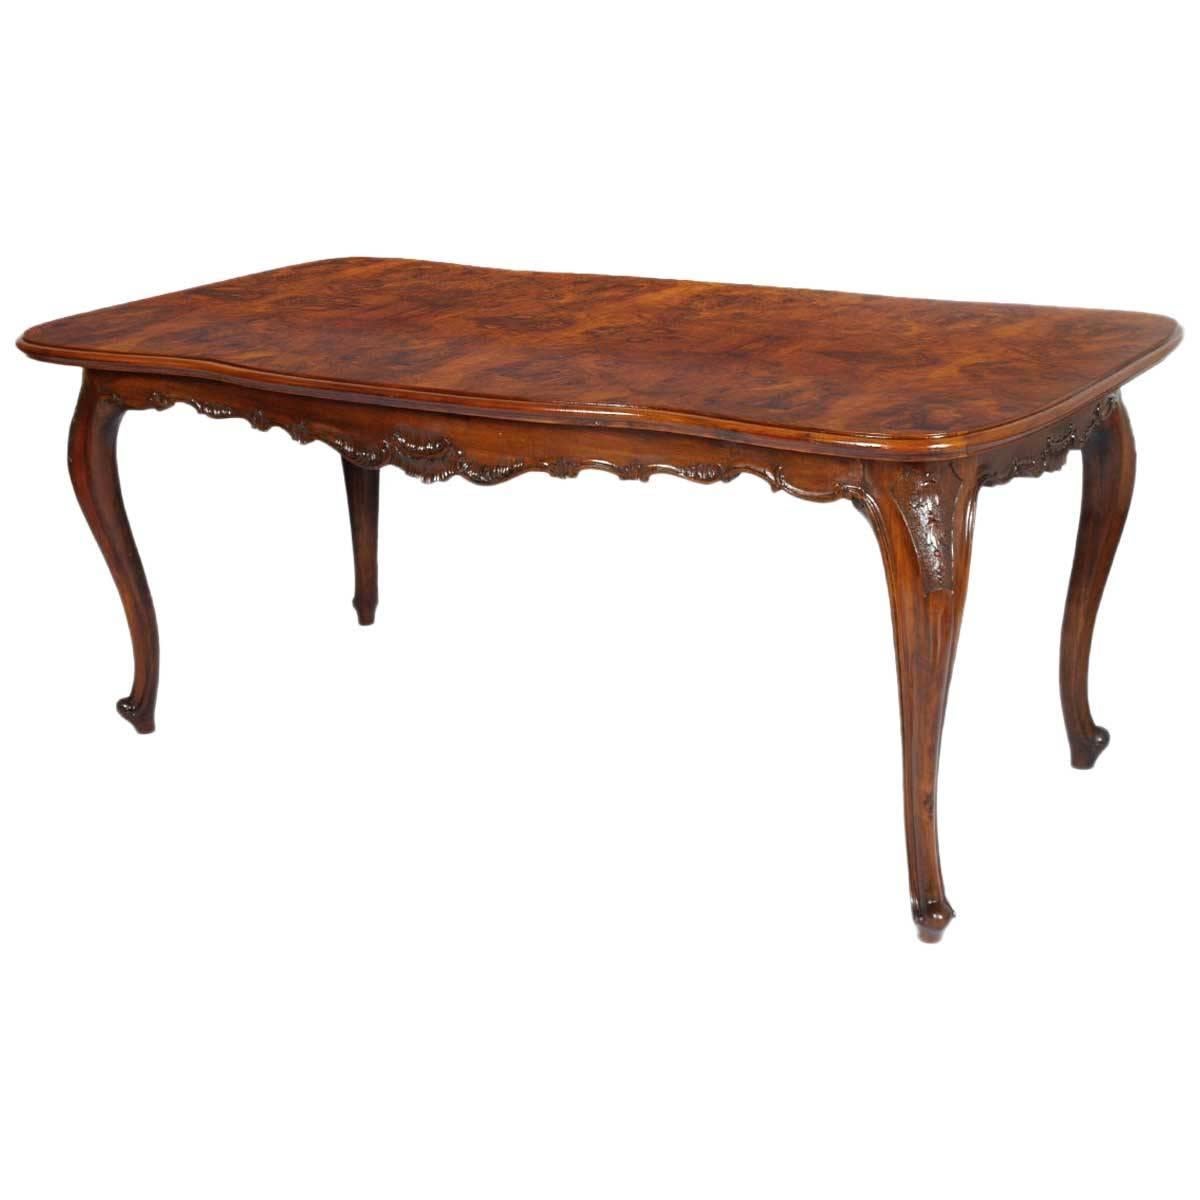 Early 20th Century Baroque Venetian Burl Walnut Hand-Carved Dining Table, 1910s For Sale